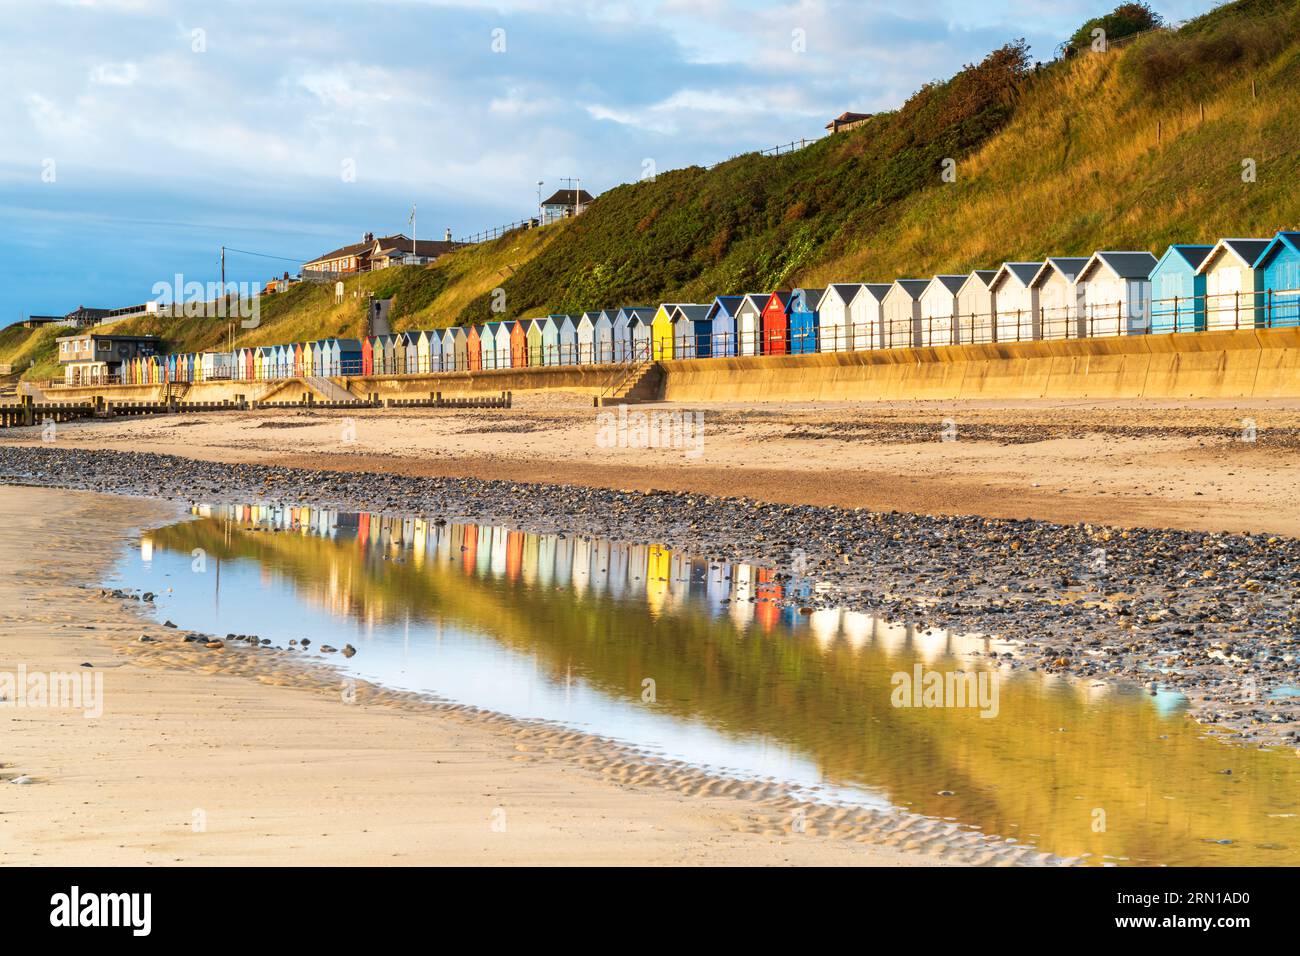 Relections of the Beach Huts on the Beach at Mundesley in North Norfolk, UK at Sunrise Stockfoto